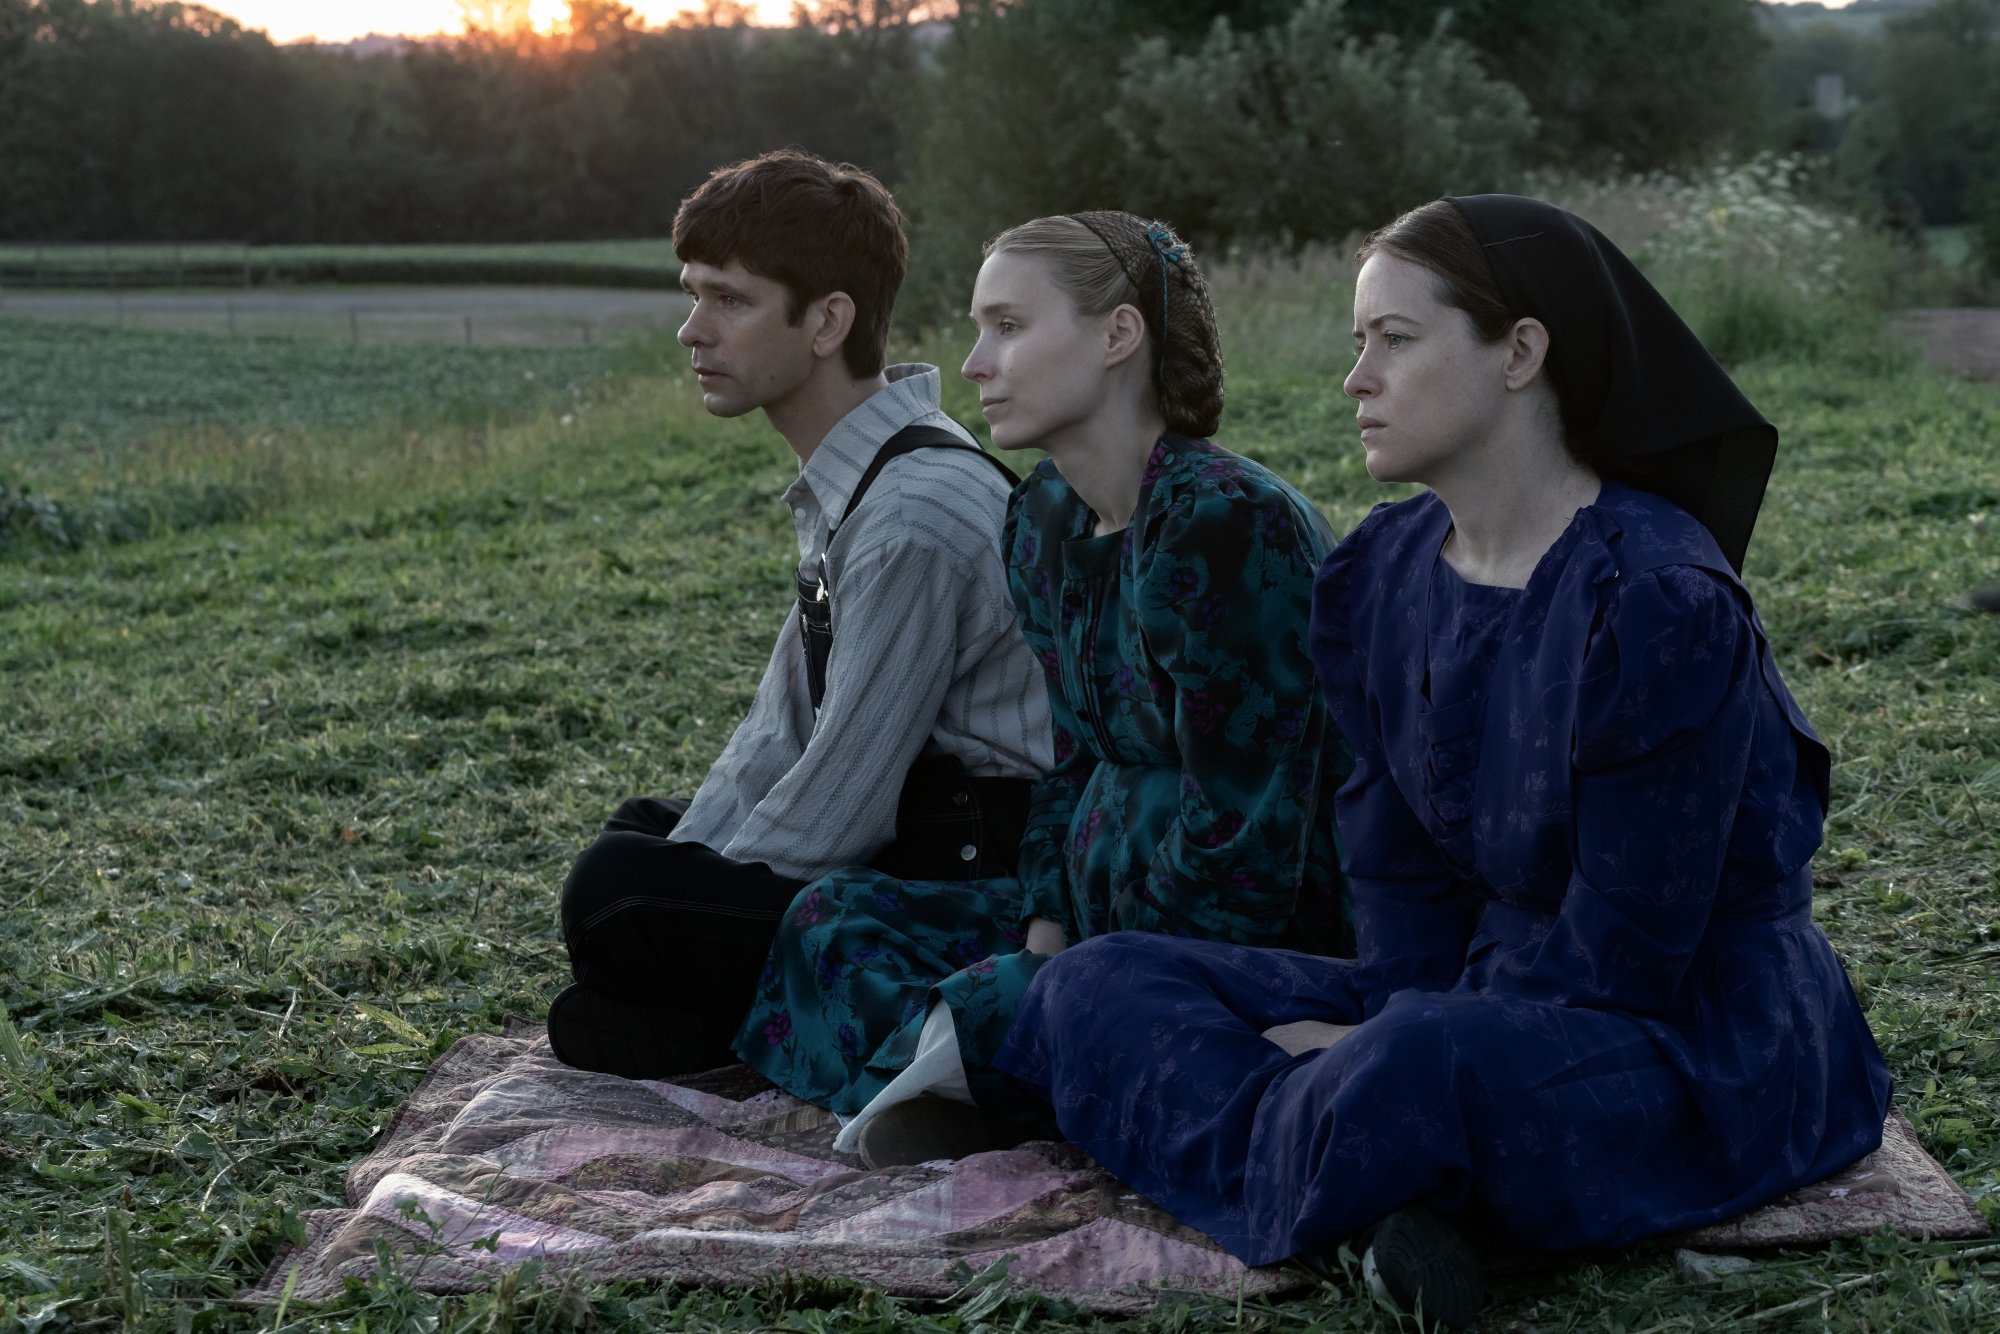 'Women Talking' Ben Whishaw stars as August, Rooney Mara as Ona and Claire Foy as Salome sitting on a blanket in a field of grass looking ahead with a serious look on their faces